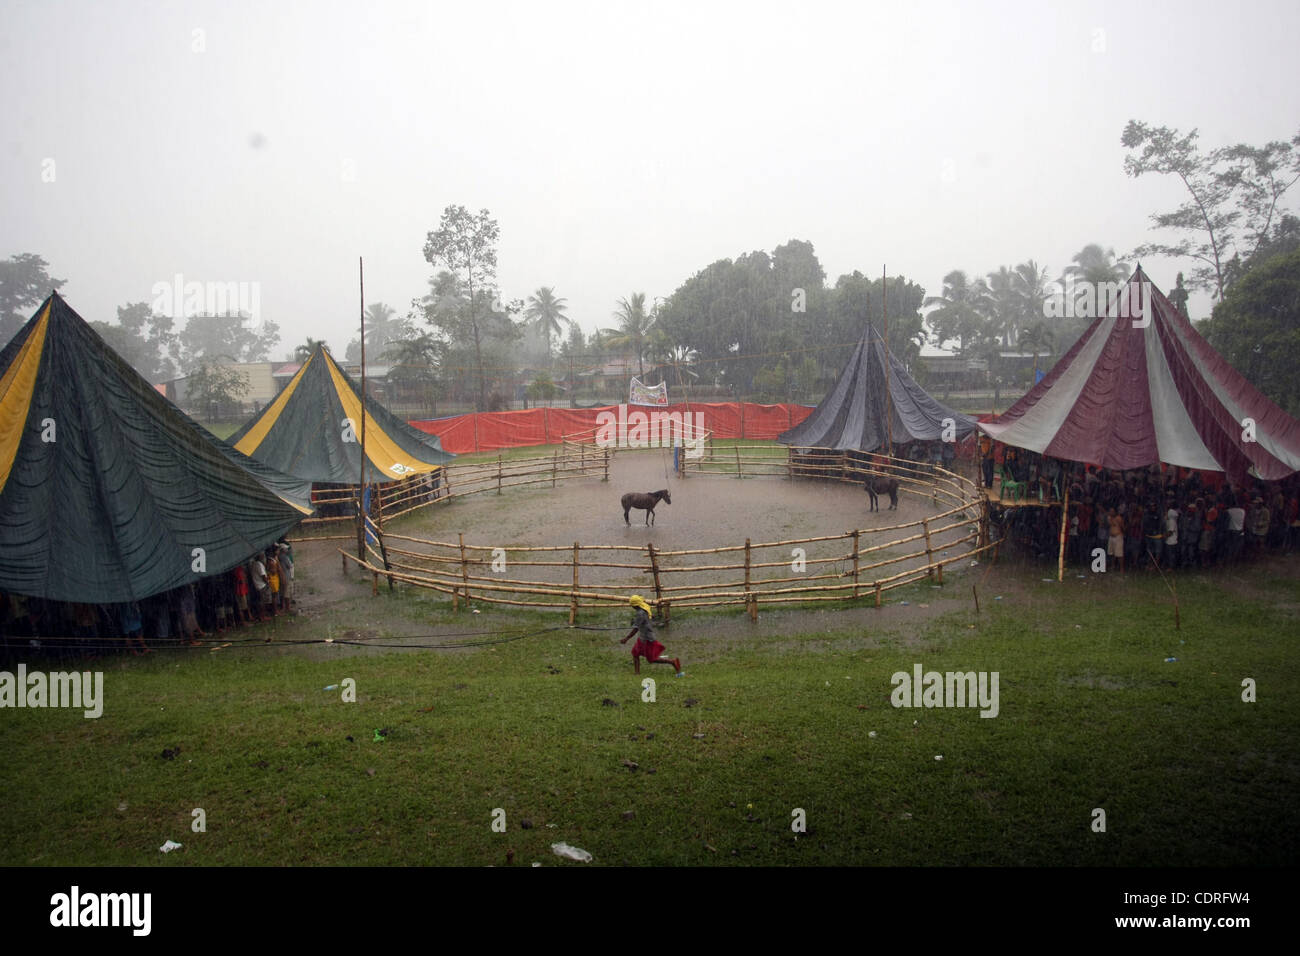 July 14, 2011 - Lake Sebu, Philippines - Locals take cover under tents from the rain as they watch cruel and barbaric horse fighting in Lake Sebu, a small town in the southern Philippines. The event was part of Tnalak Festival of South Cotabato province. Stallions were forced to fight to the death.  Stock Photo